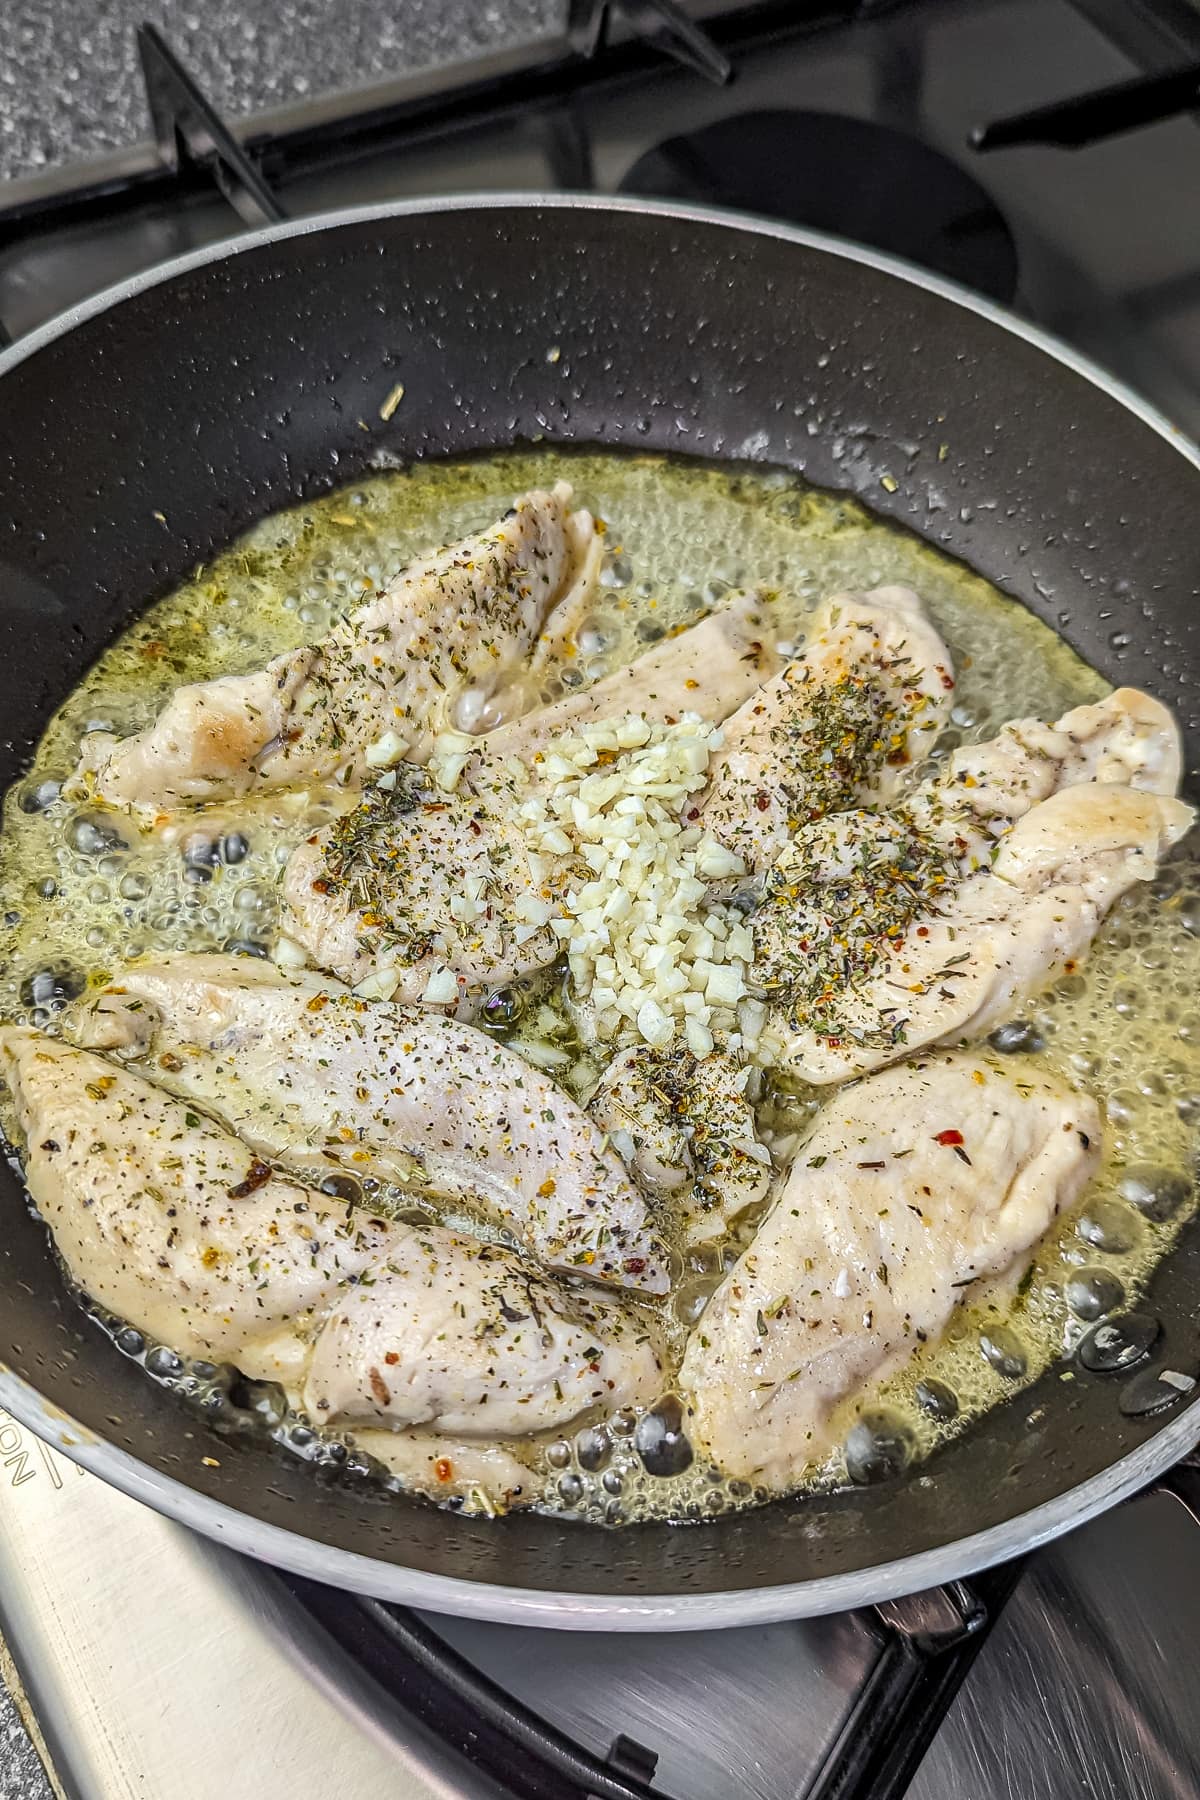 Chicken strips in a skillet being cooked with melted butter, diced garlic, and herbs.